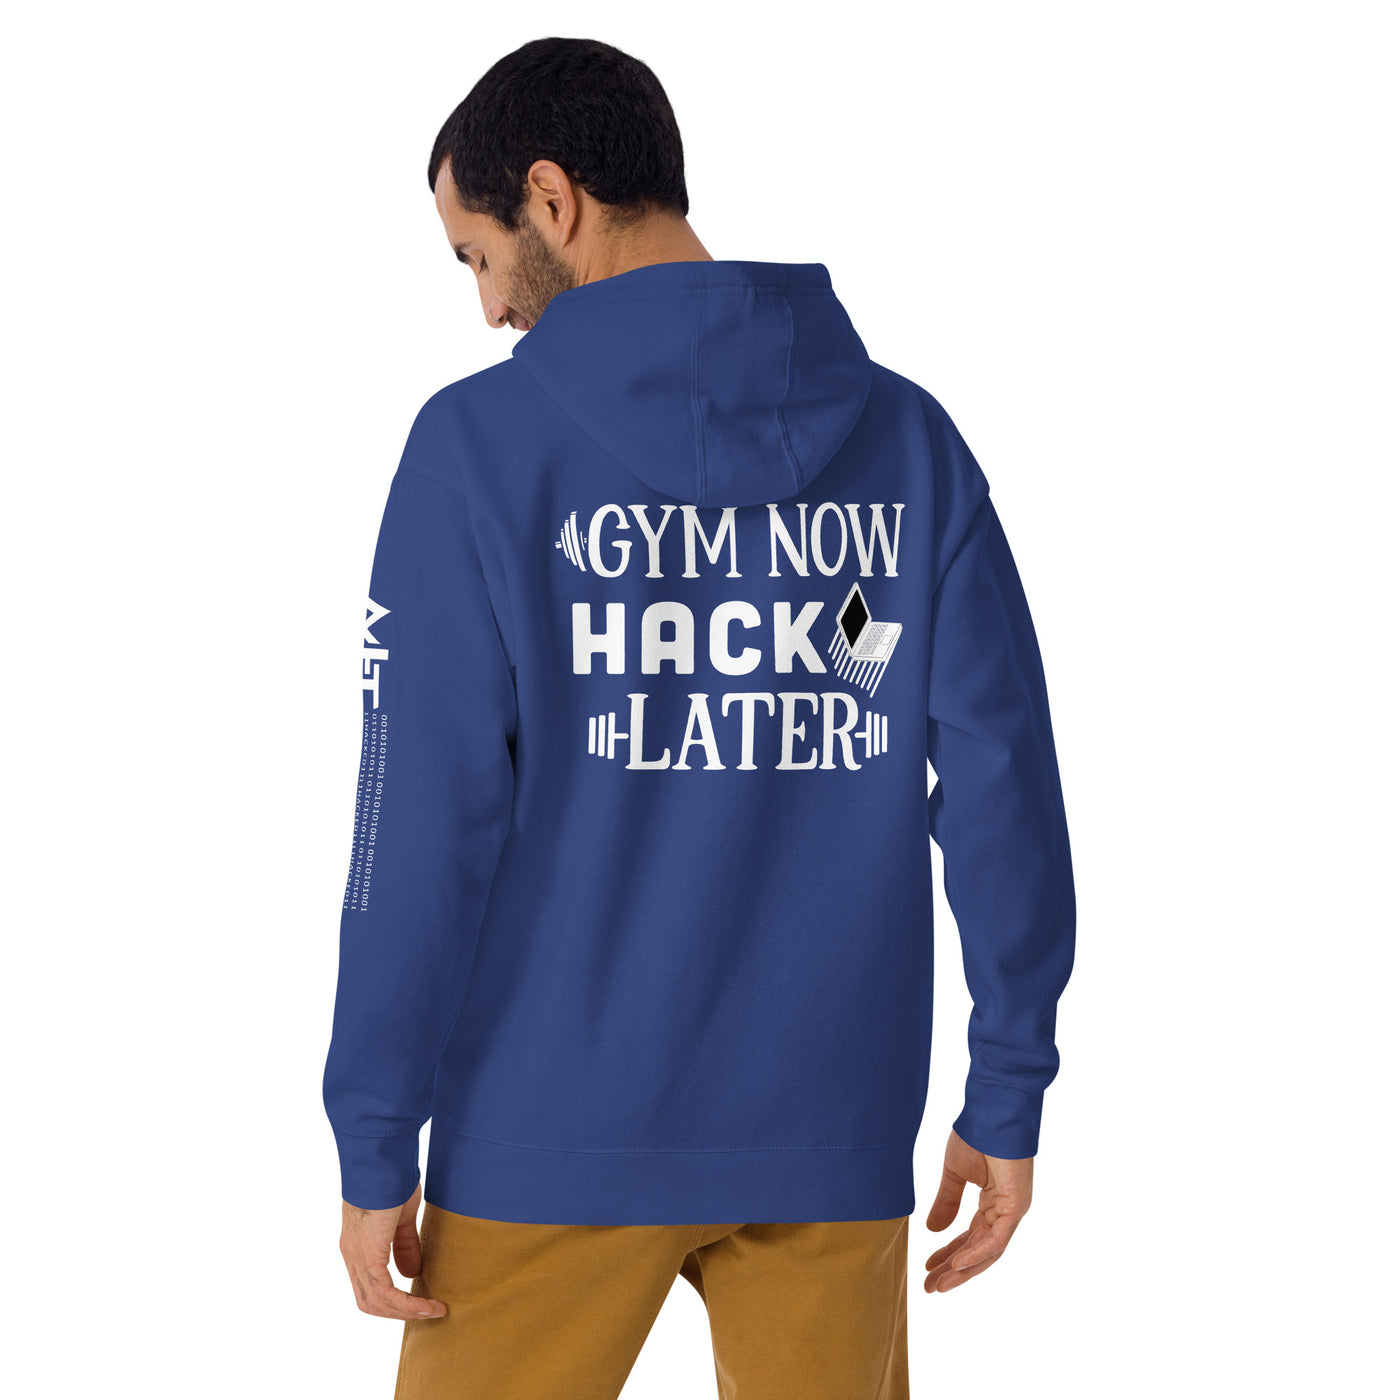 Gym now, hack later - Unisex Hoodie